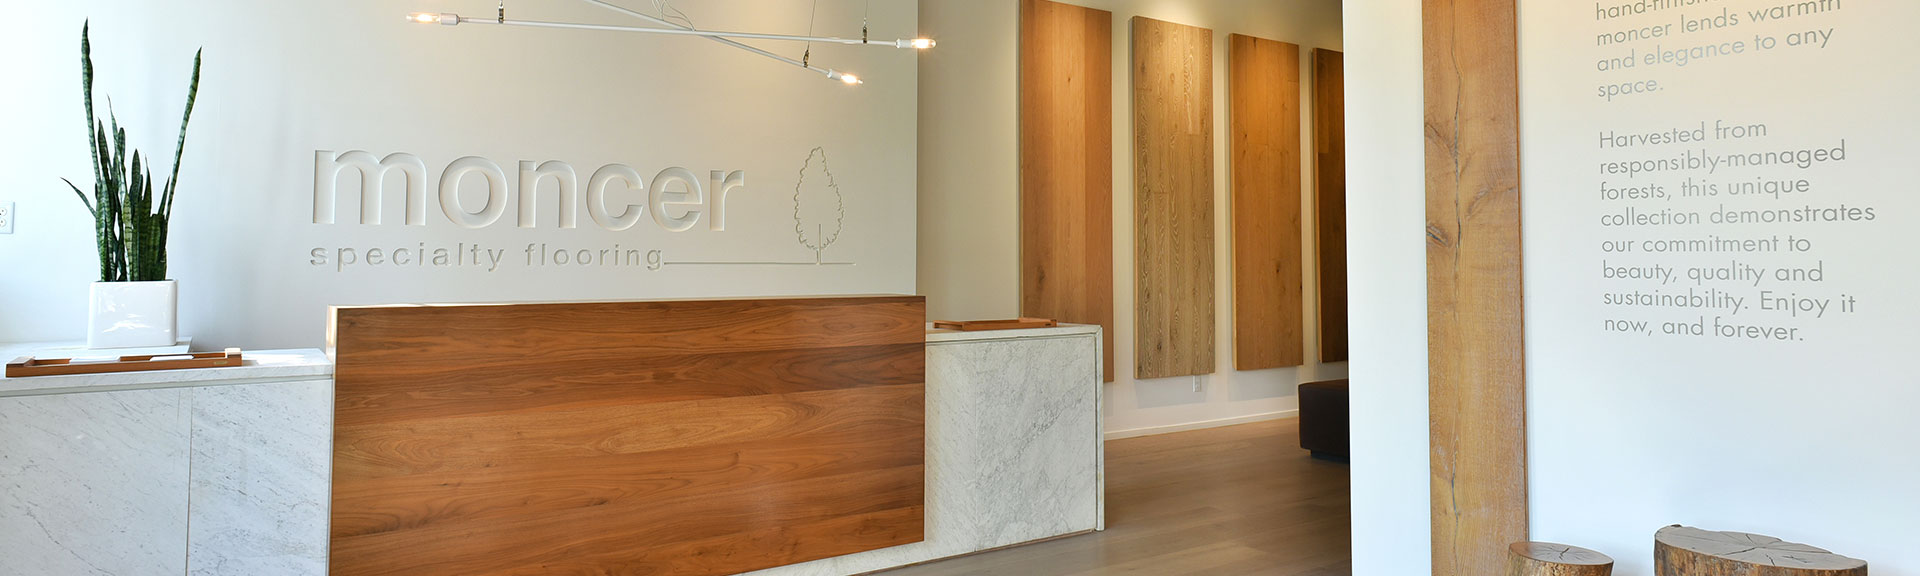 Moncer Specialty Flooring - sustainably harvested flooring from Europe